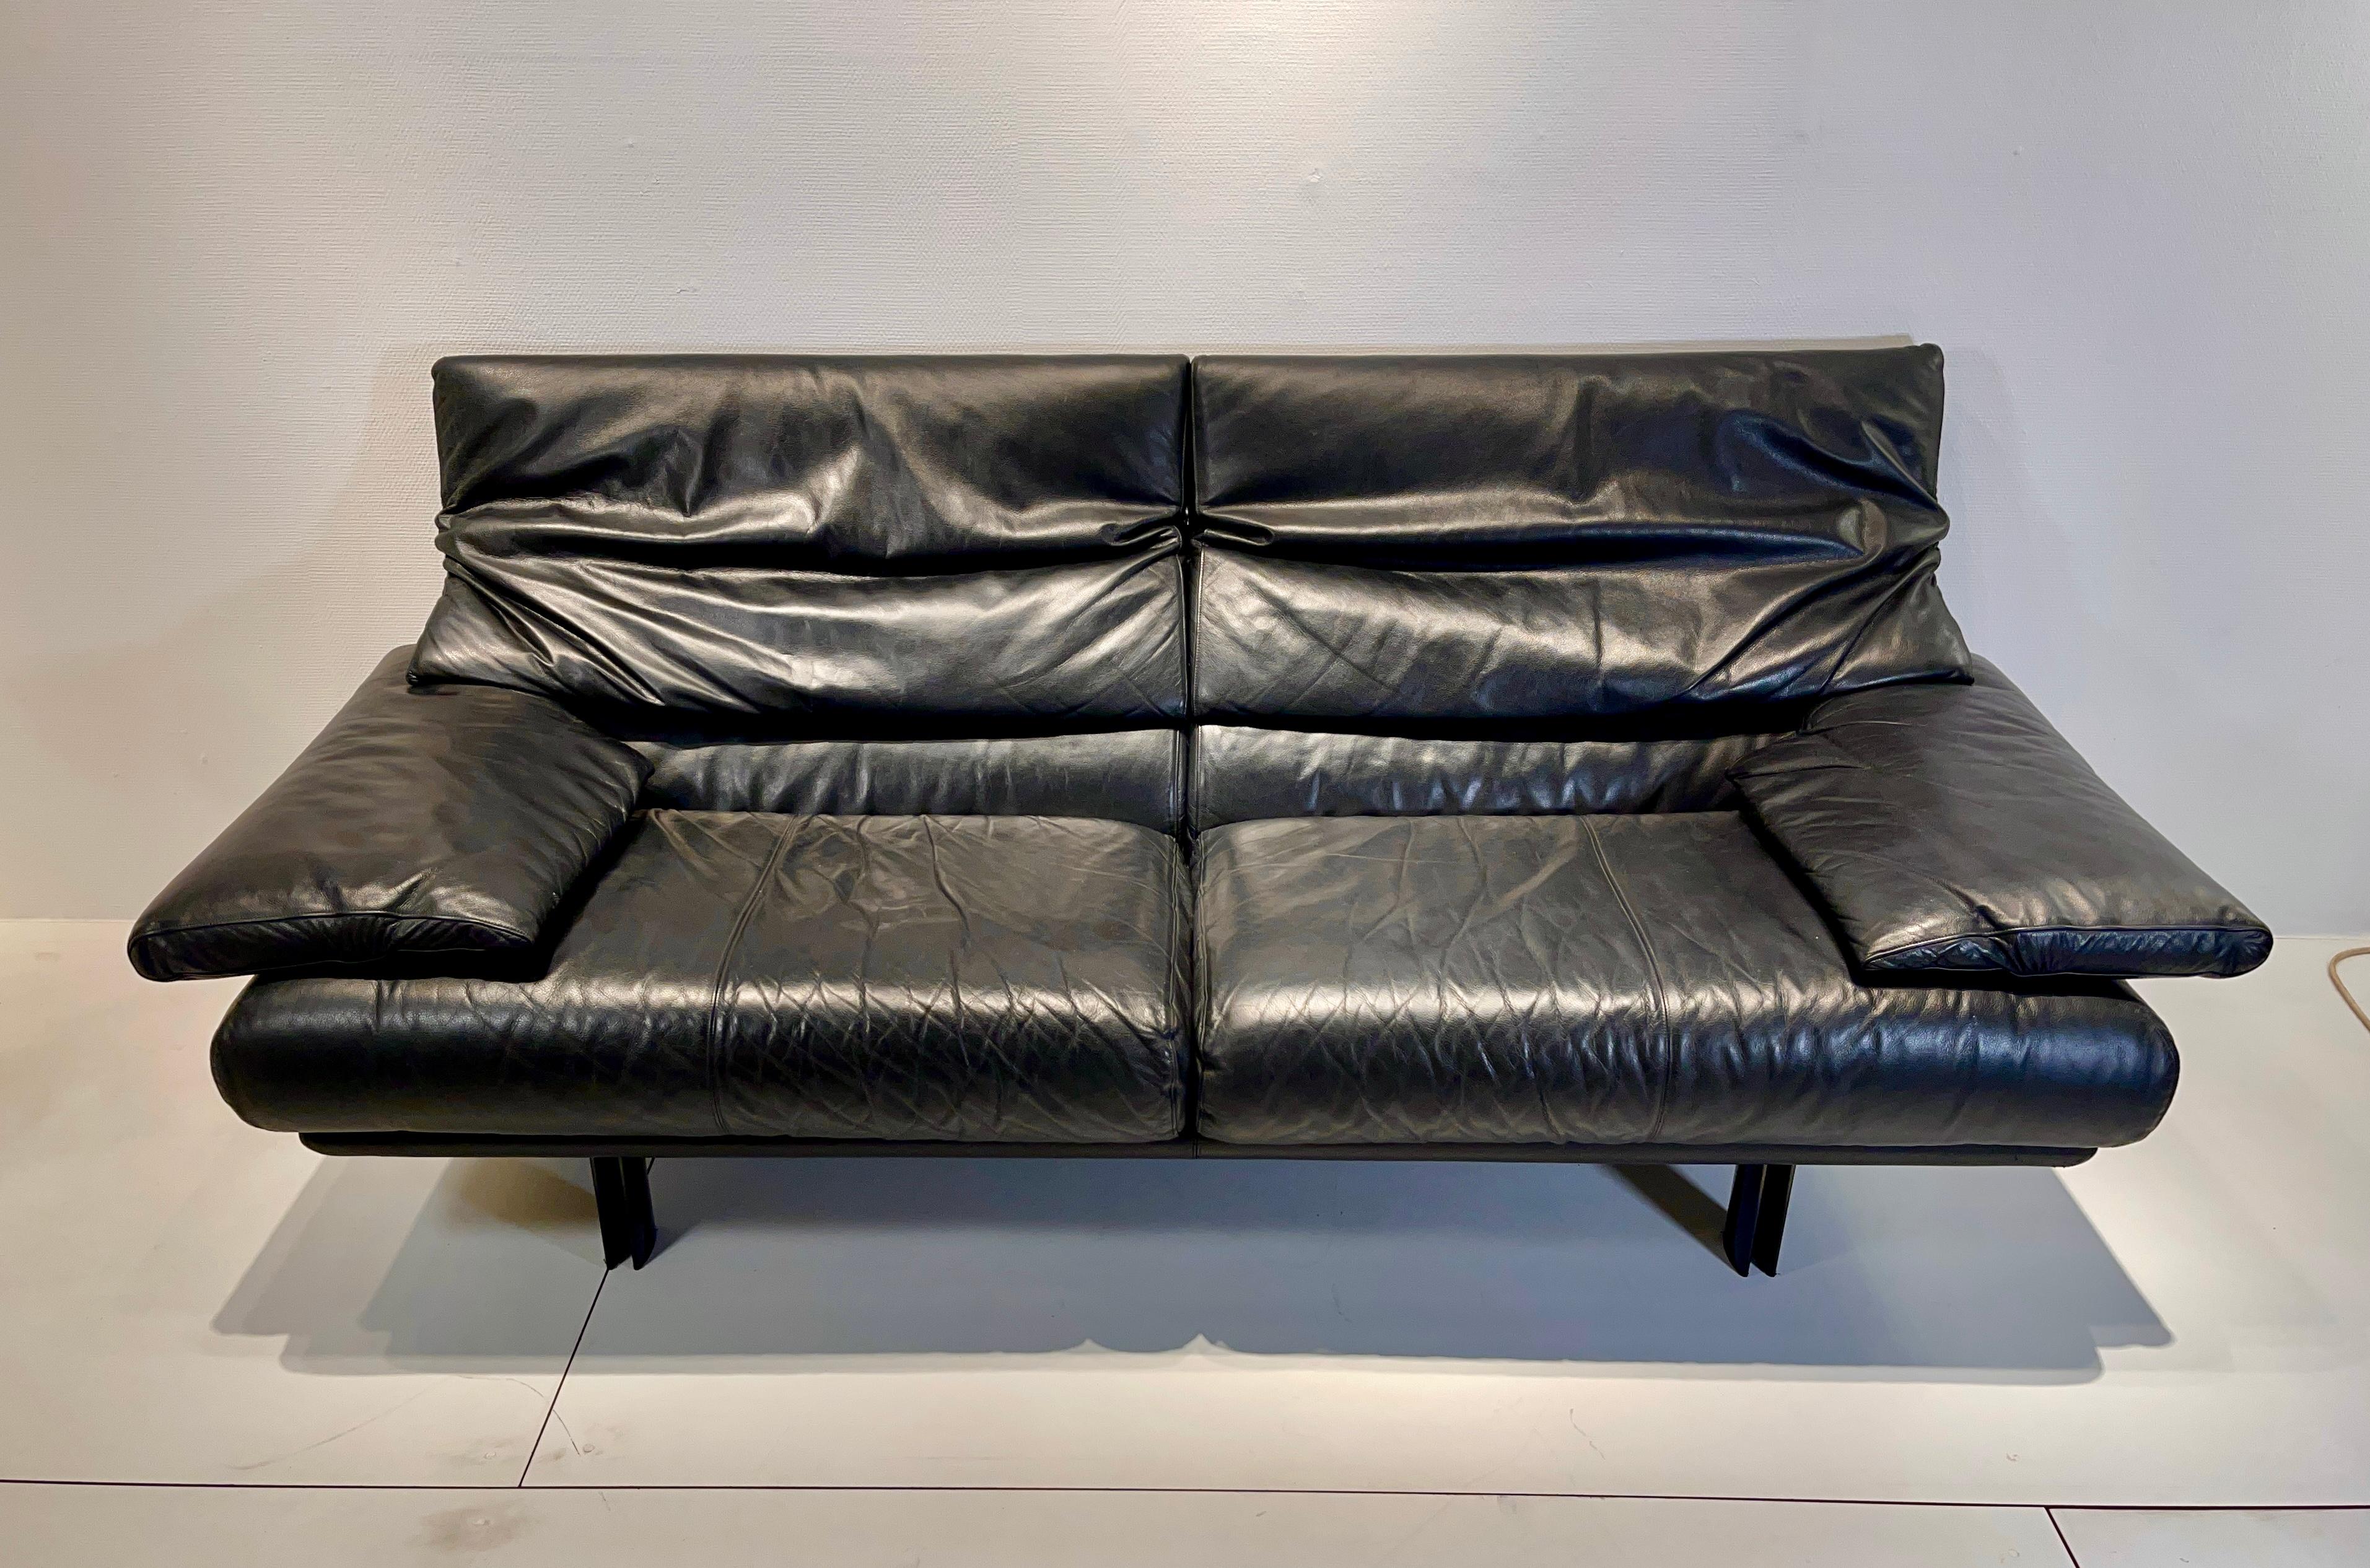 Original vintage B&B Italia sofa in very good condition.

It concerns the very rare 3 seat (210 cm) in very high-quality, supple Perle leather, colour black, with back and armrests that can be set in 5 positions and legs of black coated